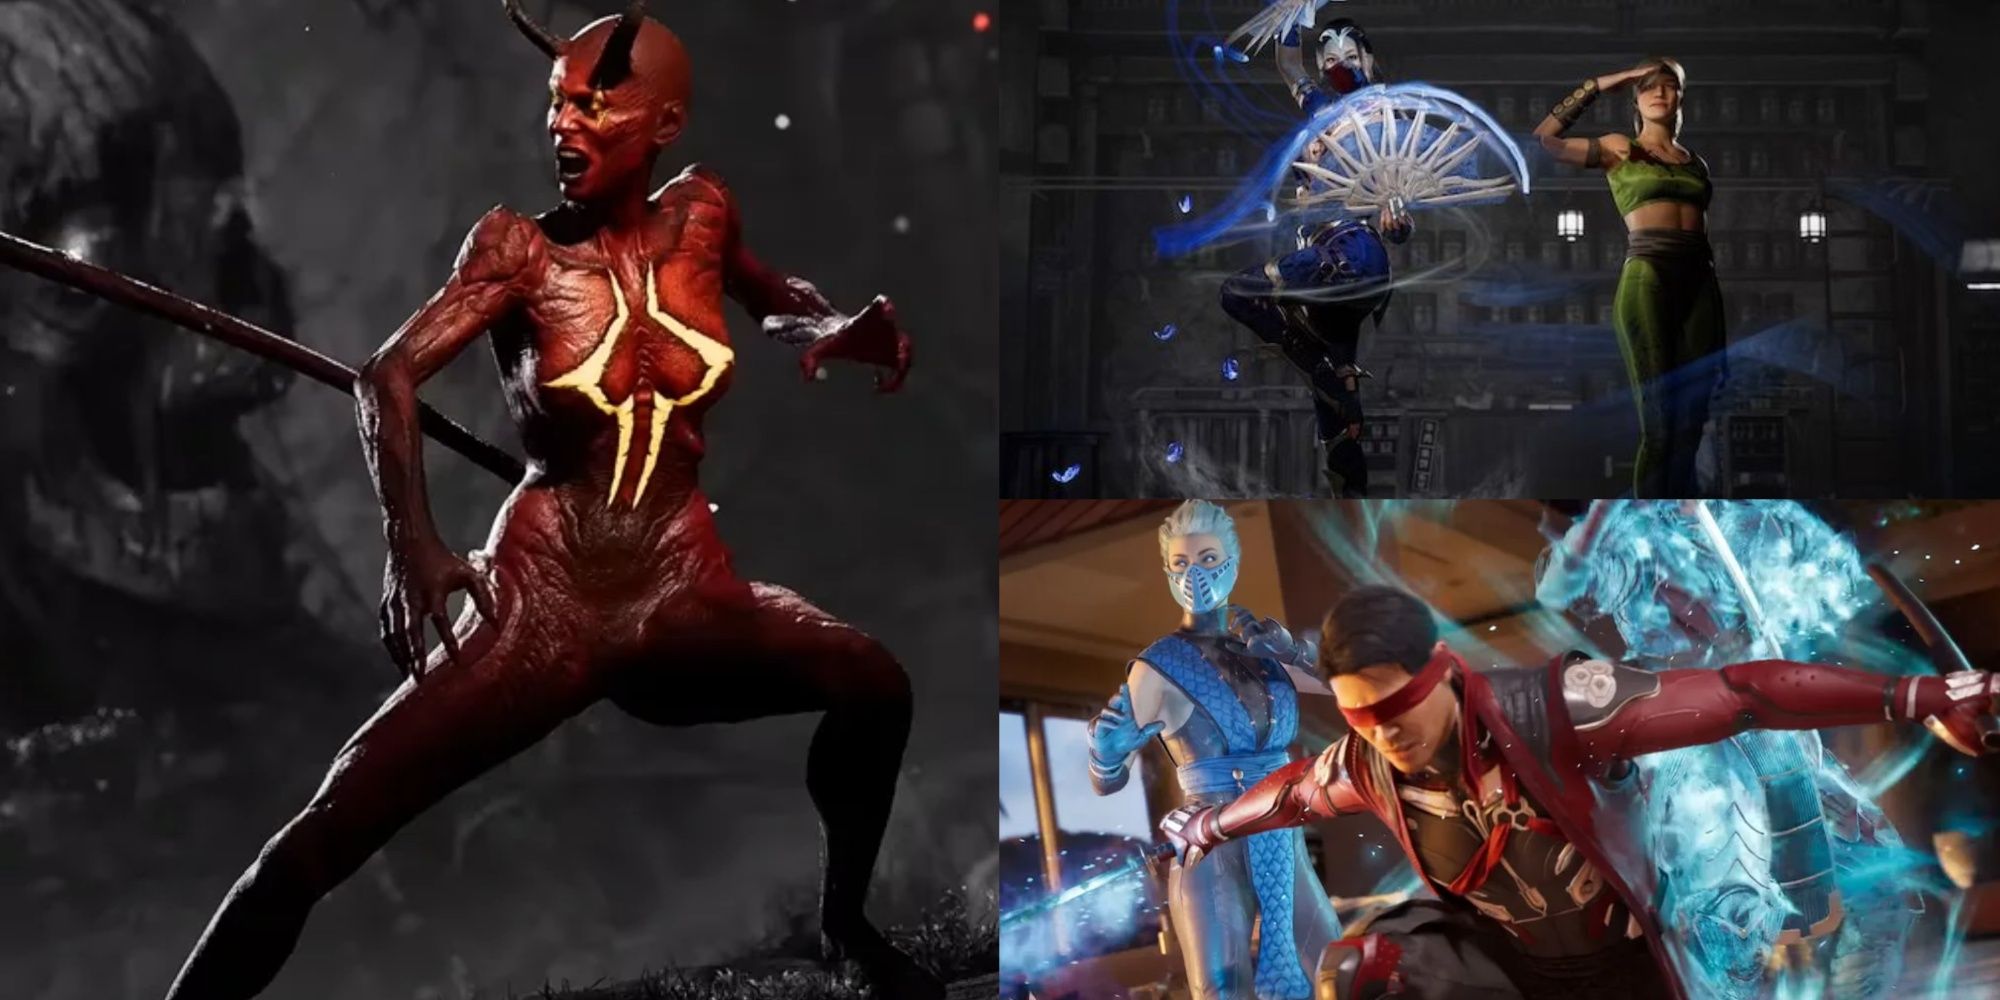 Every Confirmed Character, Kameo & Stage so far for Mortal Kombat 1 -  Update : r/MortalKombat